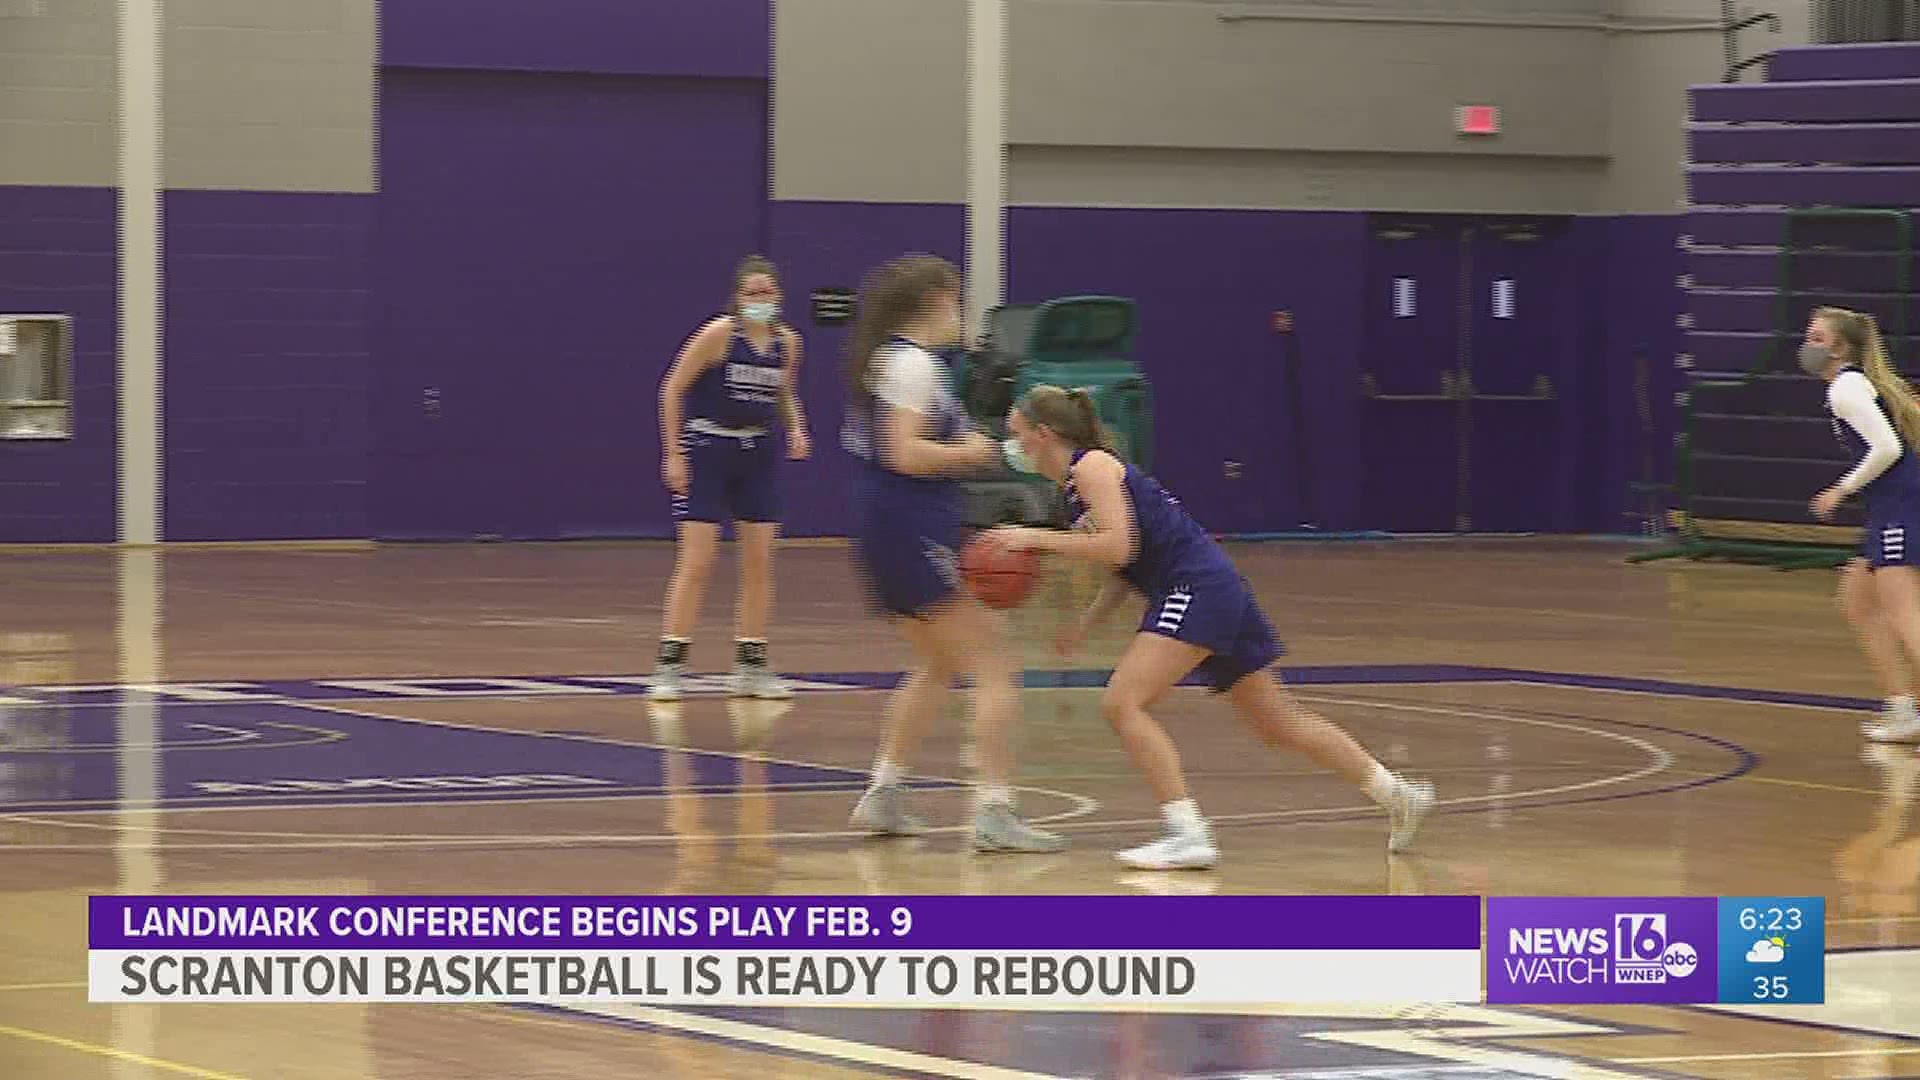 University of Scranton Director of Athletics, Dave Martin, explained how the basketball programs hope to play eight games in the Landmark Conference